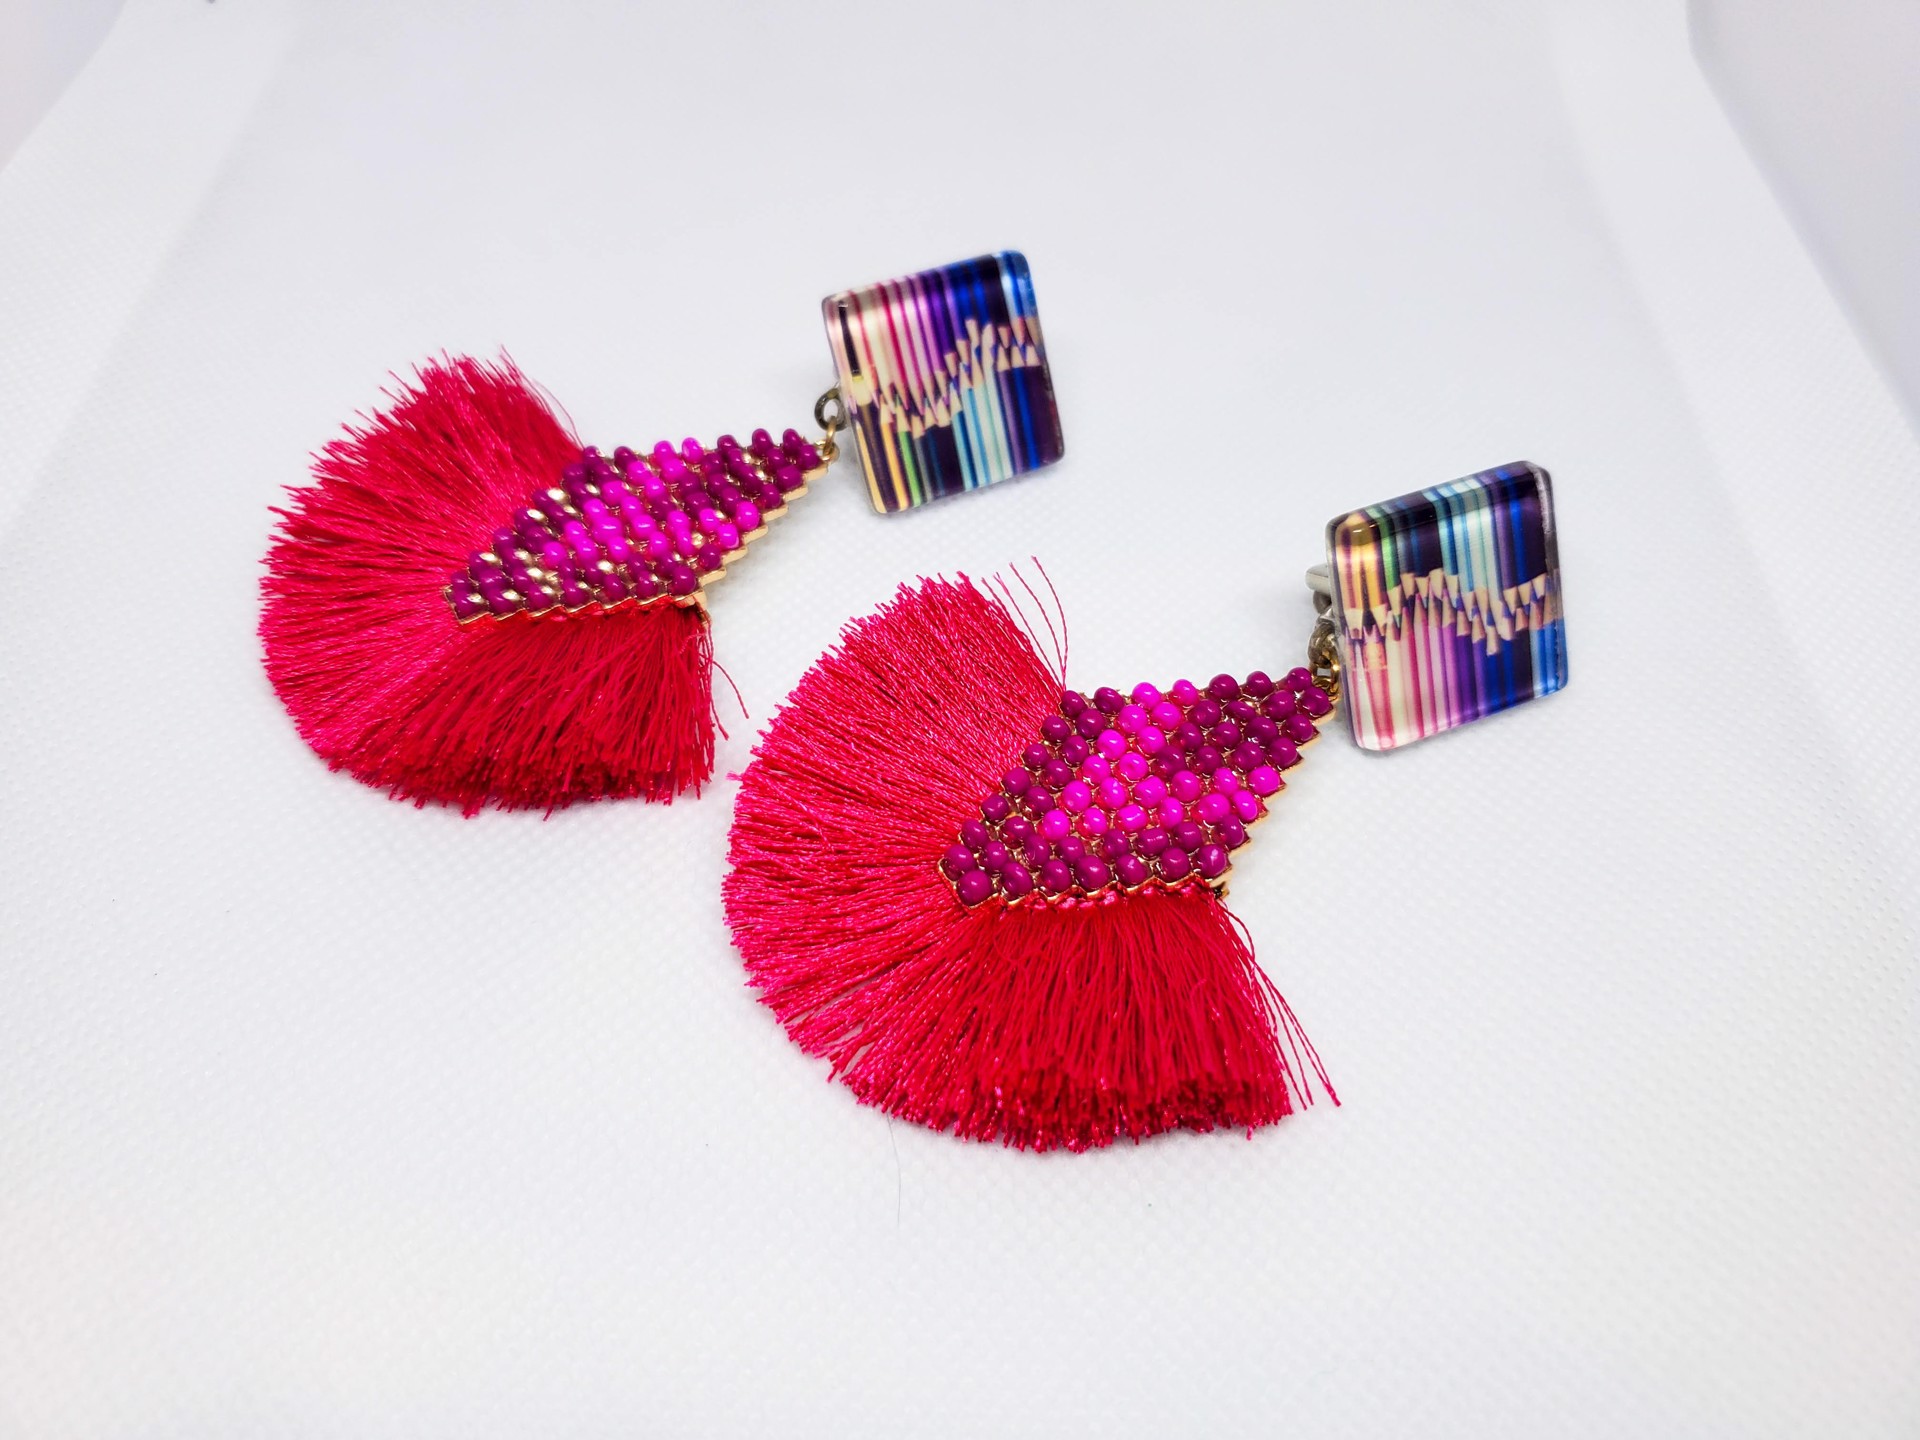 Hot Pink Fan Tassels with Glass Tops with Pencils Earrings by Sally Bass